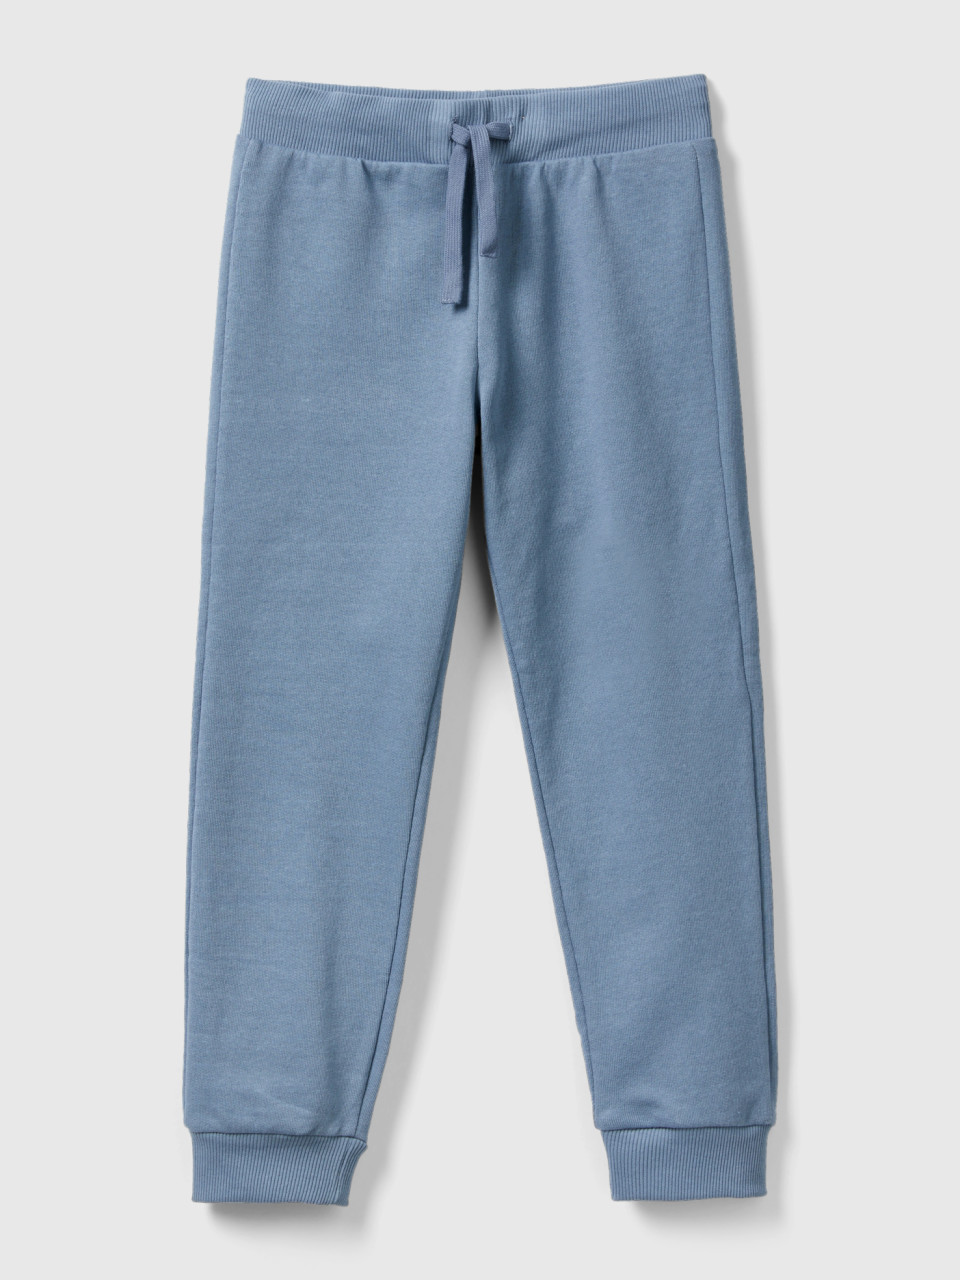 Benetton, Sporty Trousers With Drawstring, Air Force Blue, Kids